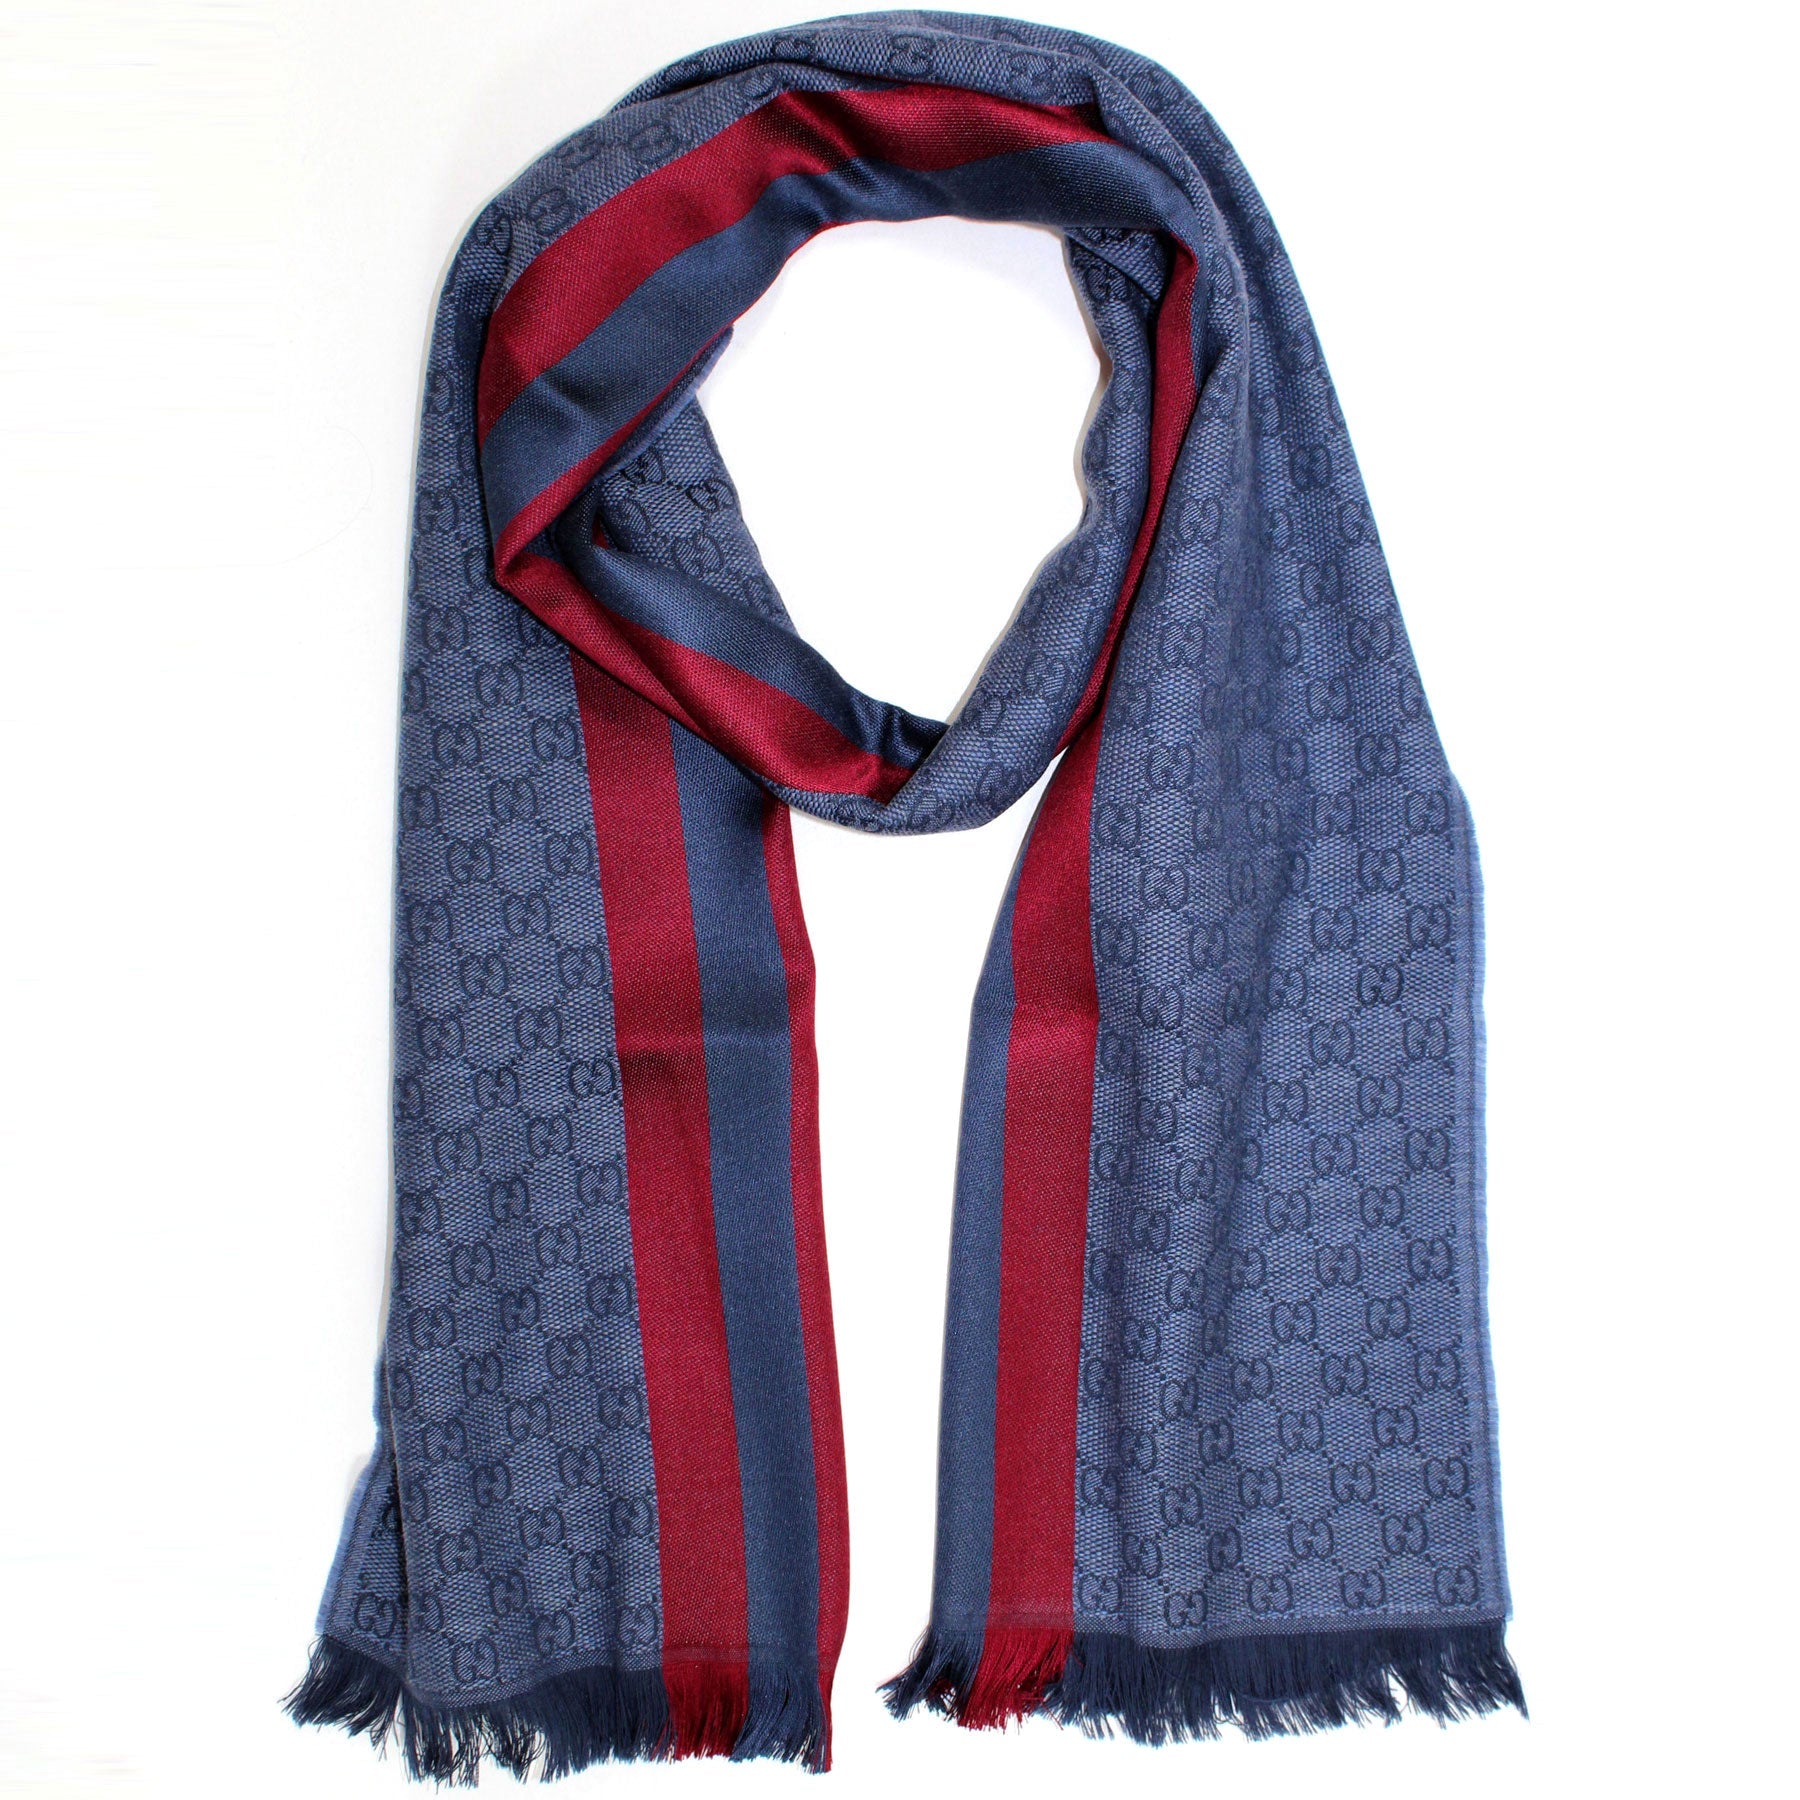 Gucci, Accessories, Gucci Pink Monogram Wool Fringed Square Scarf